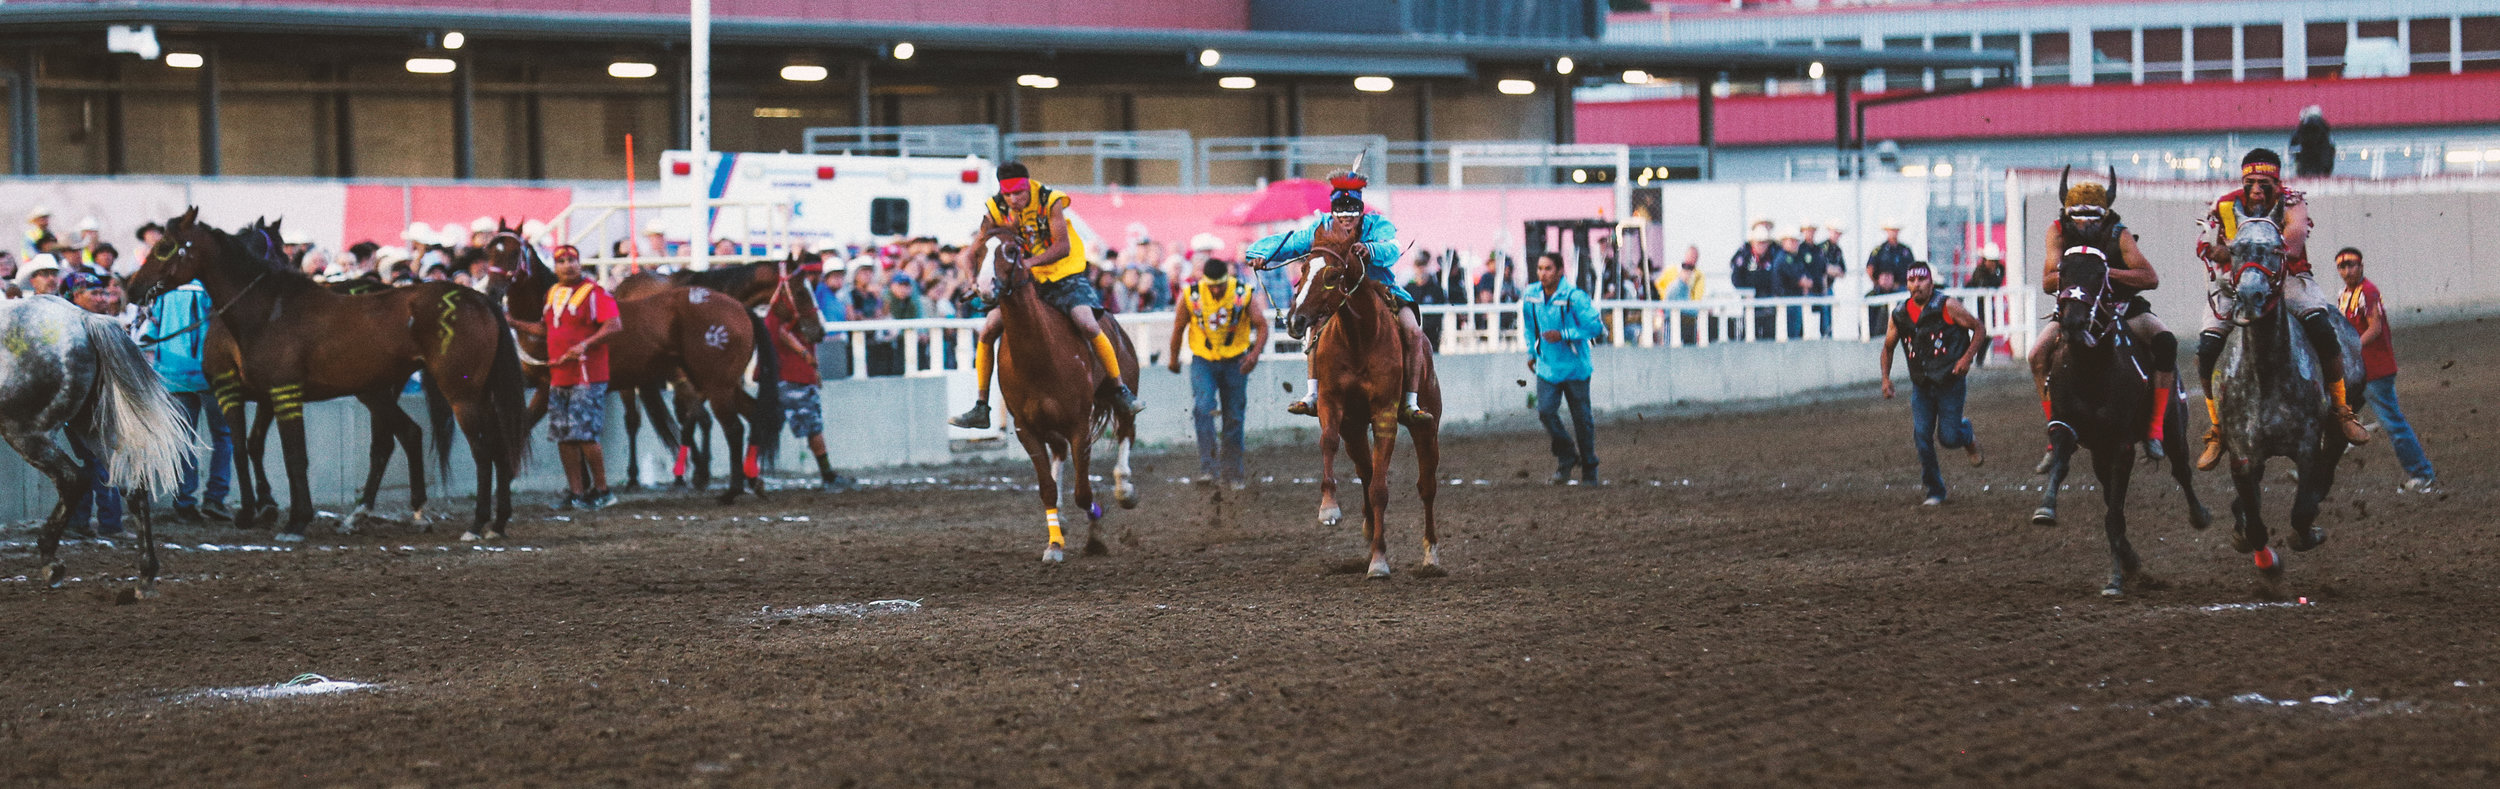 The_first_ever_Indian_Relay_at_the_Calgary_Stampede_Calgary2017.jpg